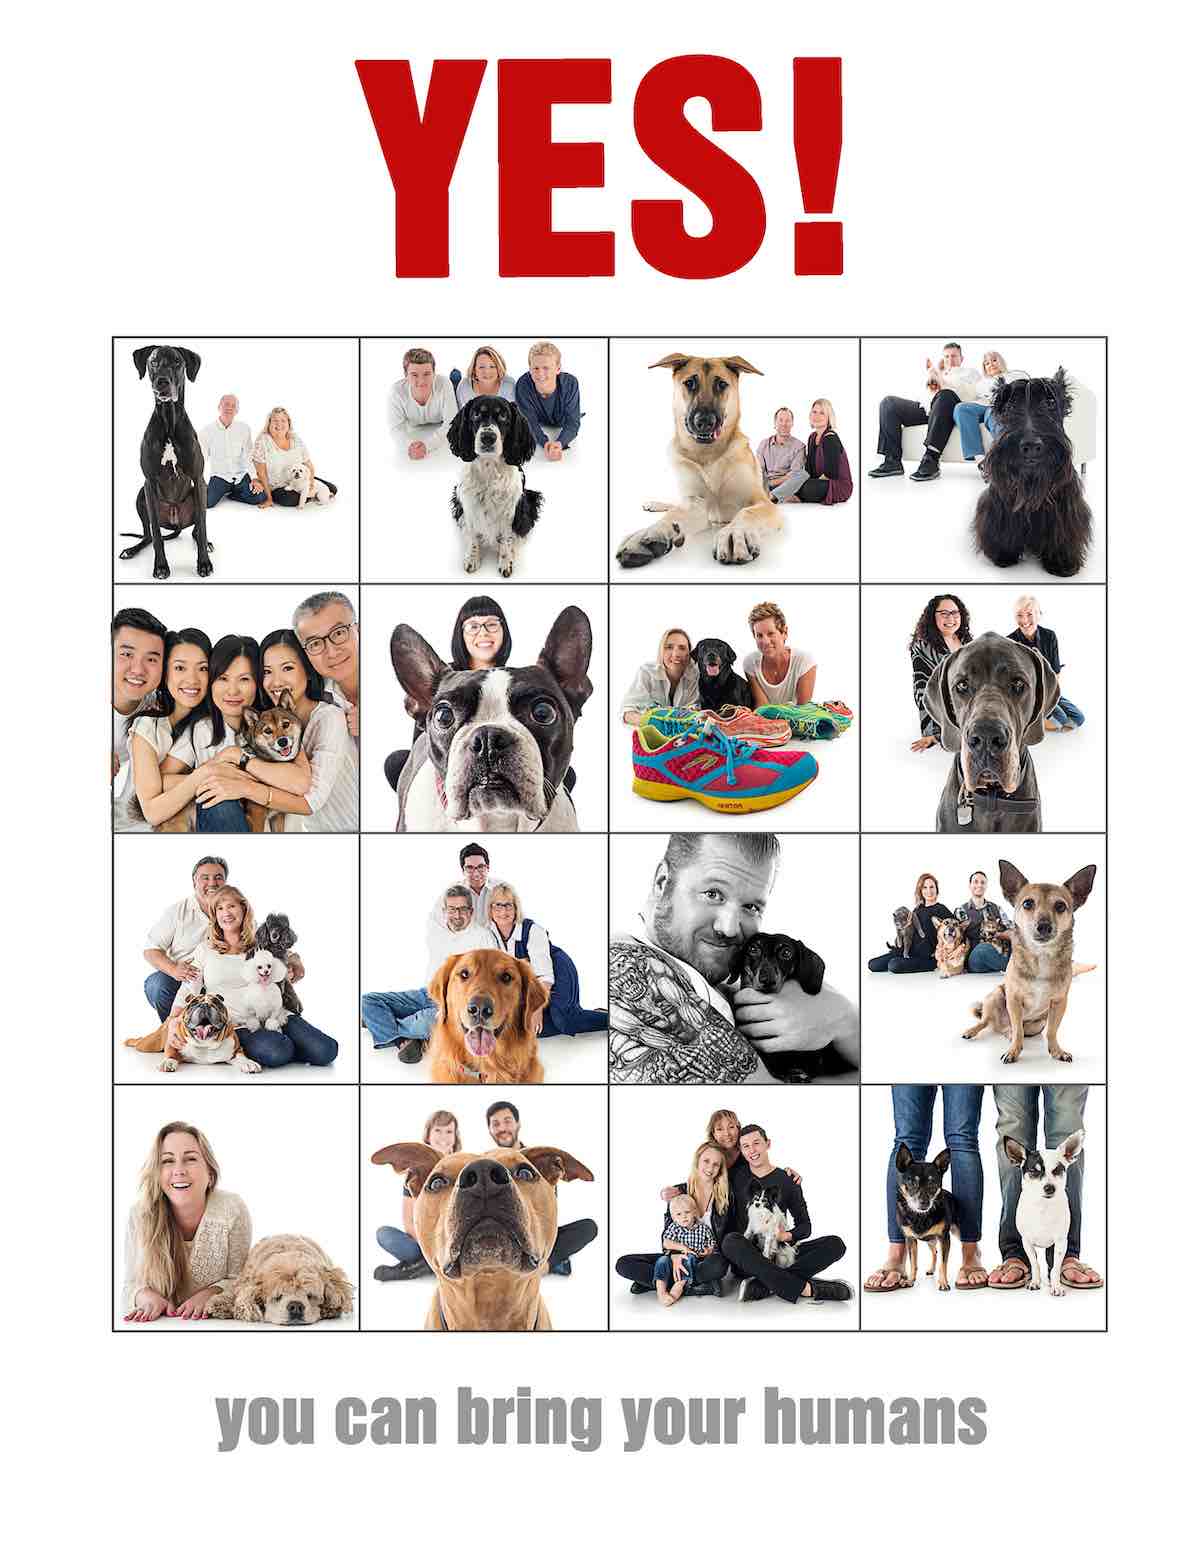 Yes! Bring Your Humans! At Dogma Pet Portraits in Costa Mesa, Orange County, California.